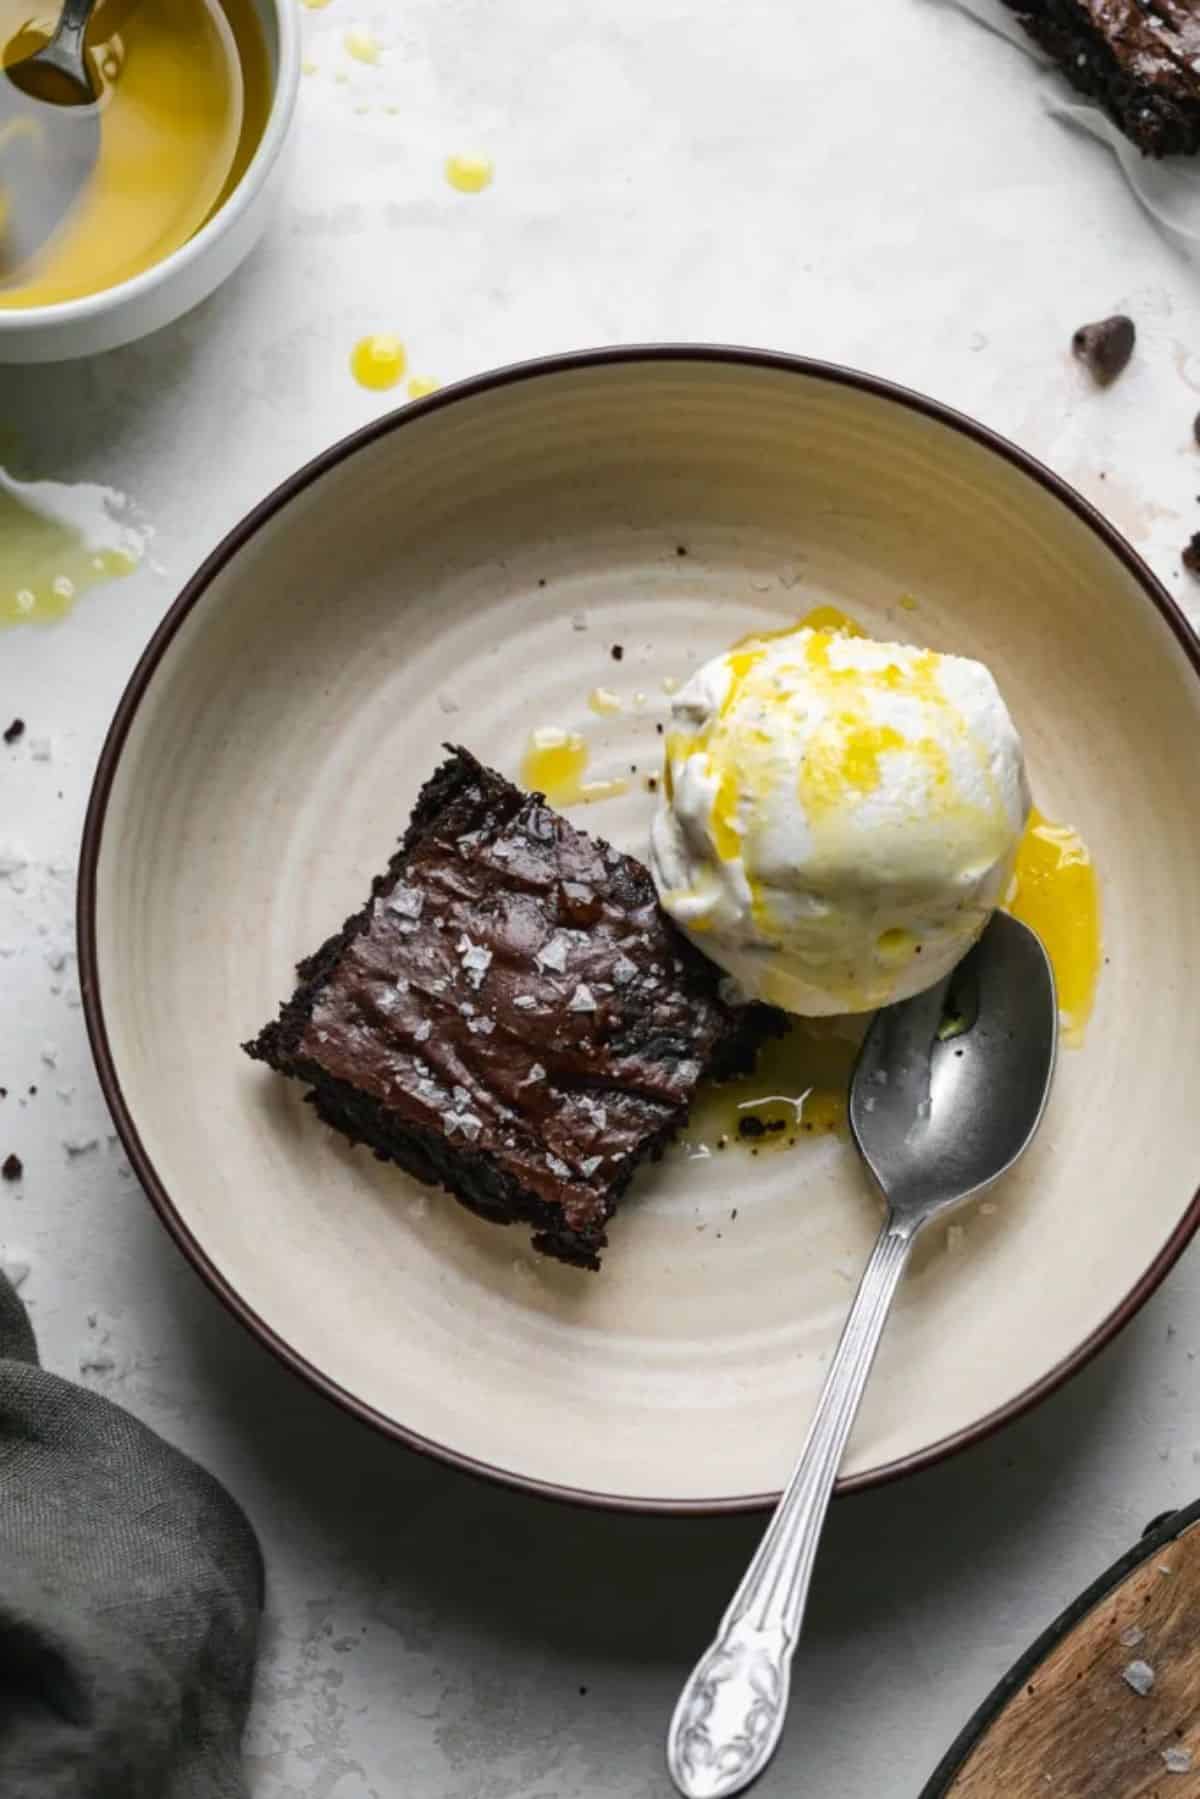 Delicious fudgy olive oil brownie on a gray plate.